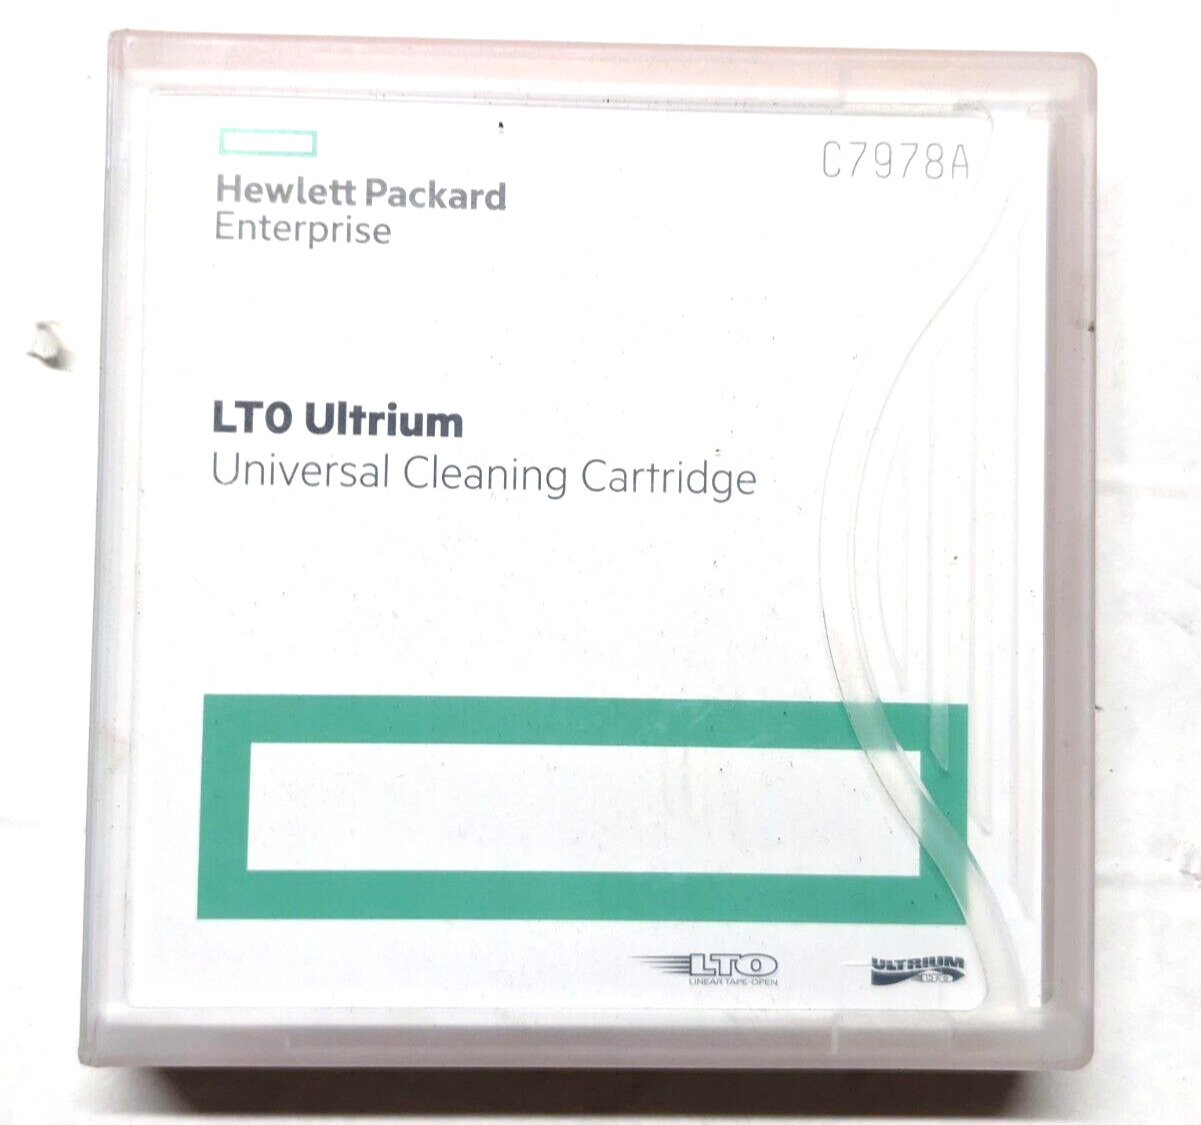 EACH HP C7978A LTO Ultrium Universal Cleaning Cartridge - USED EACH (DR9)